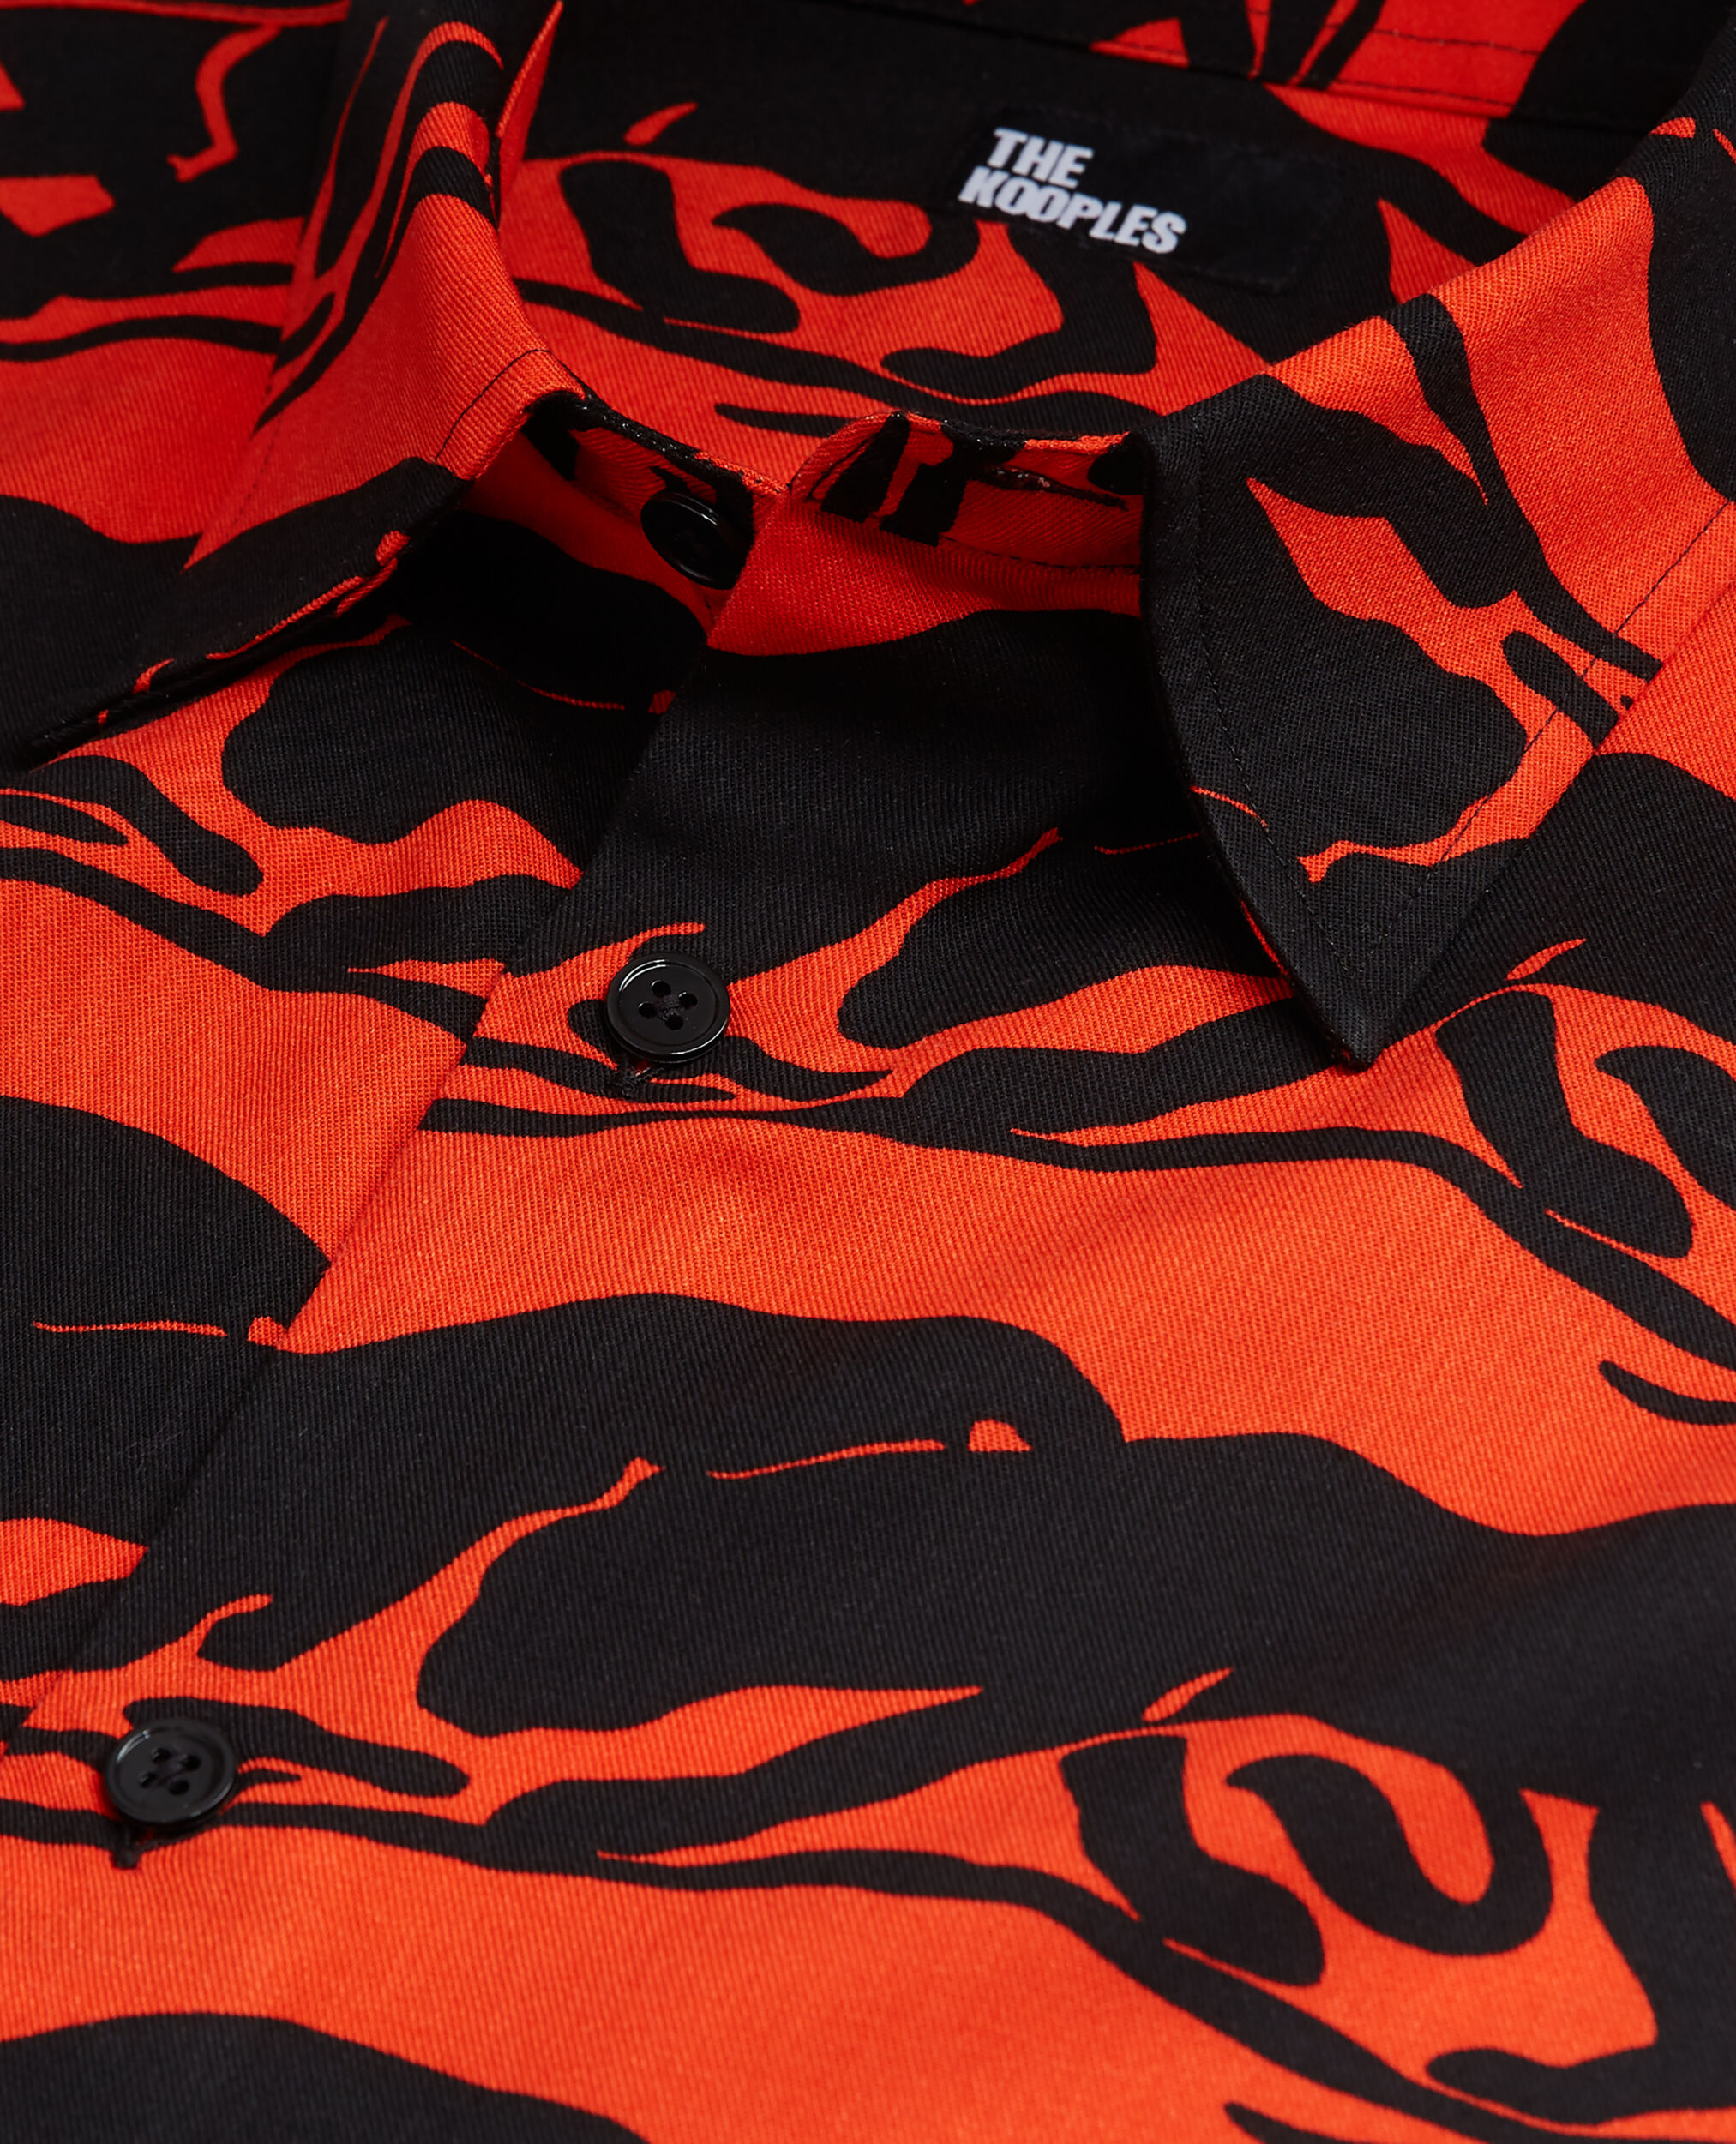 Panther print casual shirt, BLACK - RED, hi-res image number null